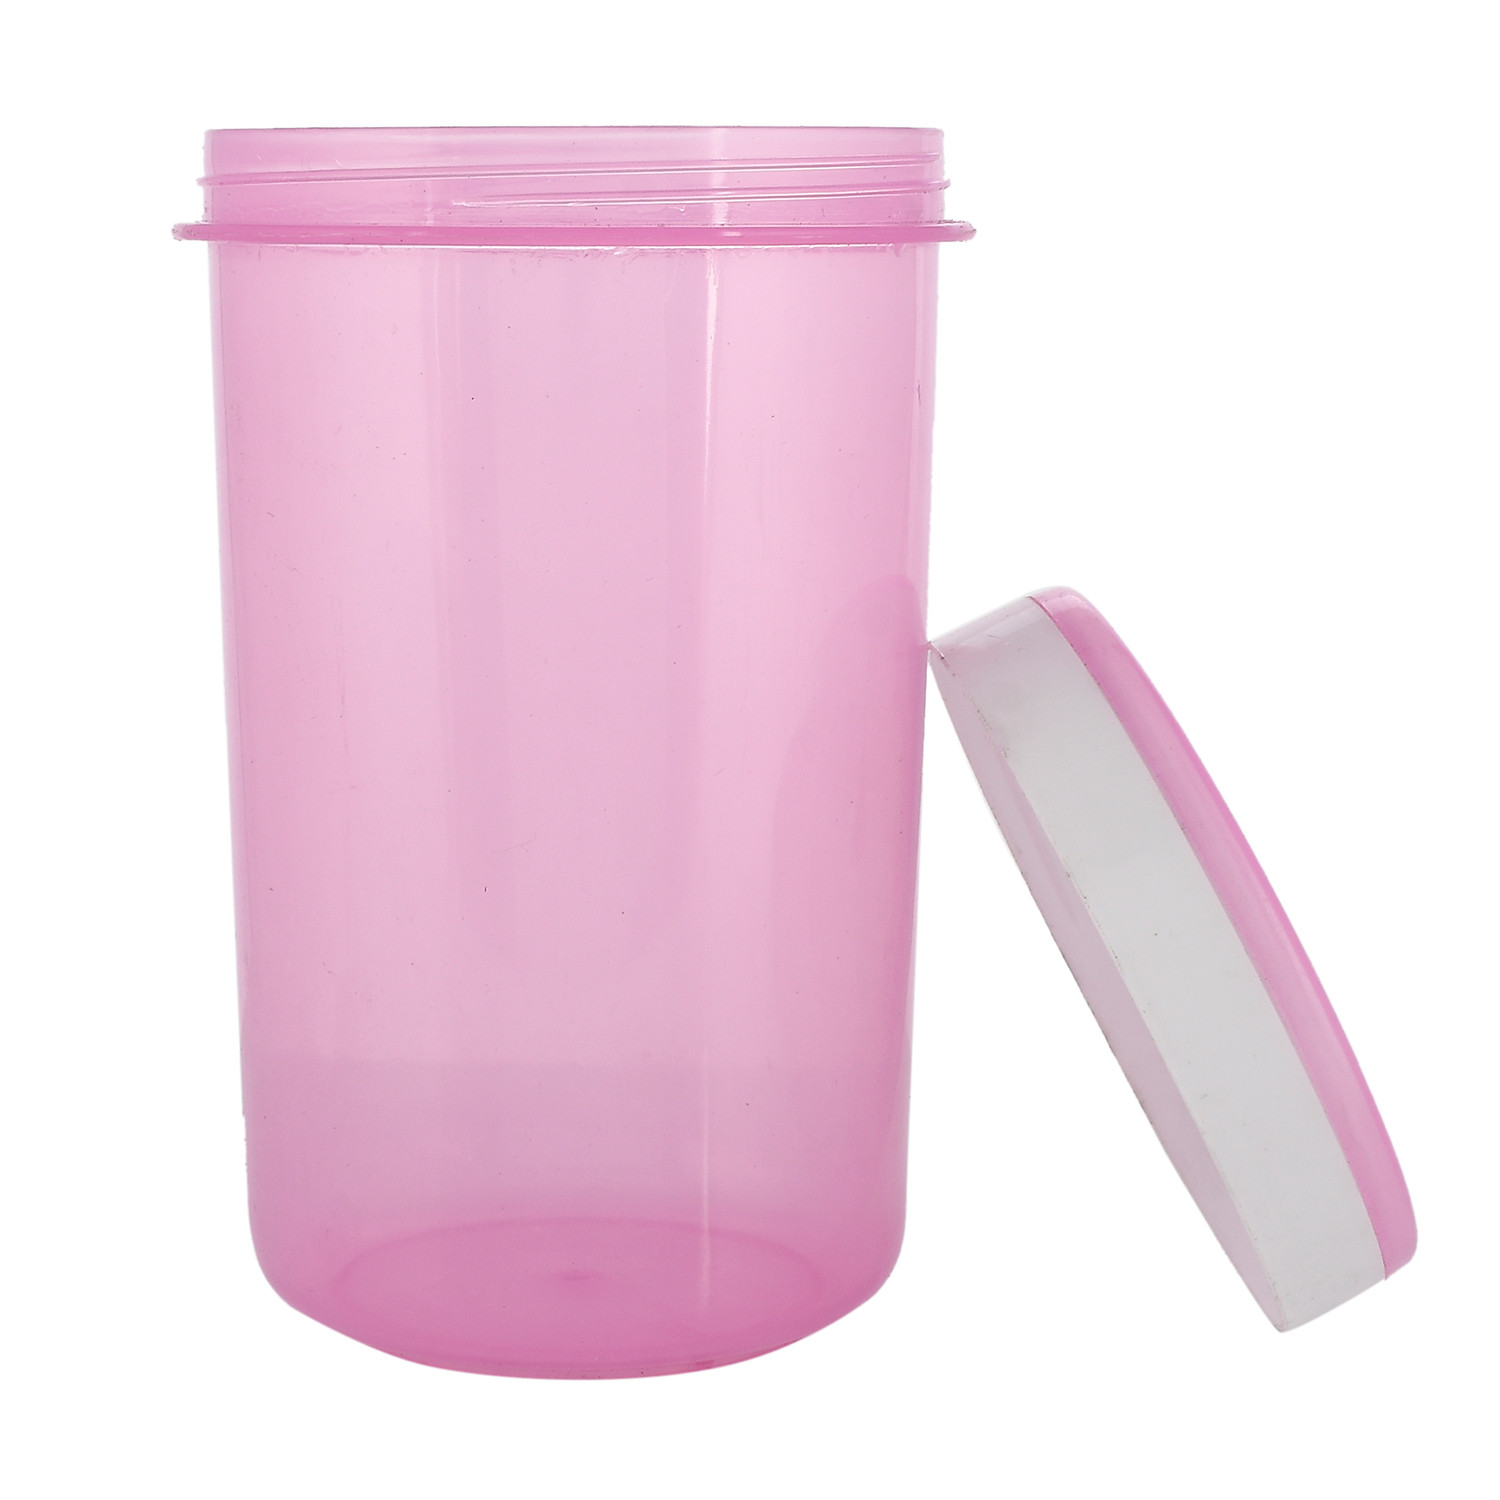 Kuber Industries Containers Set for Kitchen|BPA-Free Plastic Storage Containers Set|Kitchen Storage Containers|Grocery Containers with Spoon|SPICY 2000 ML| (Pink)